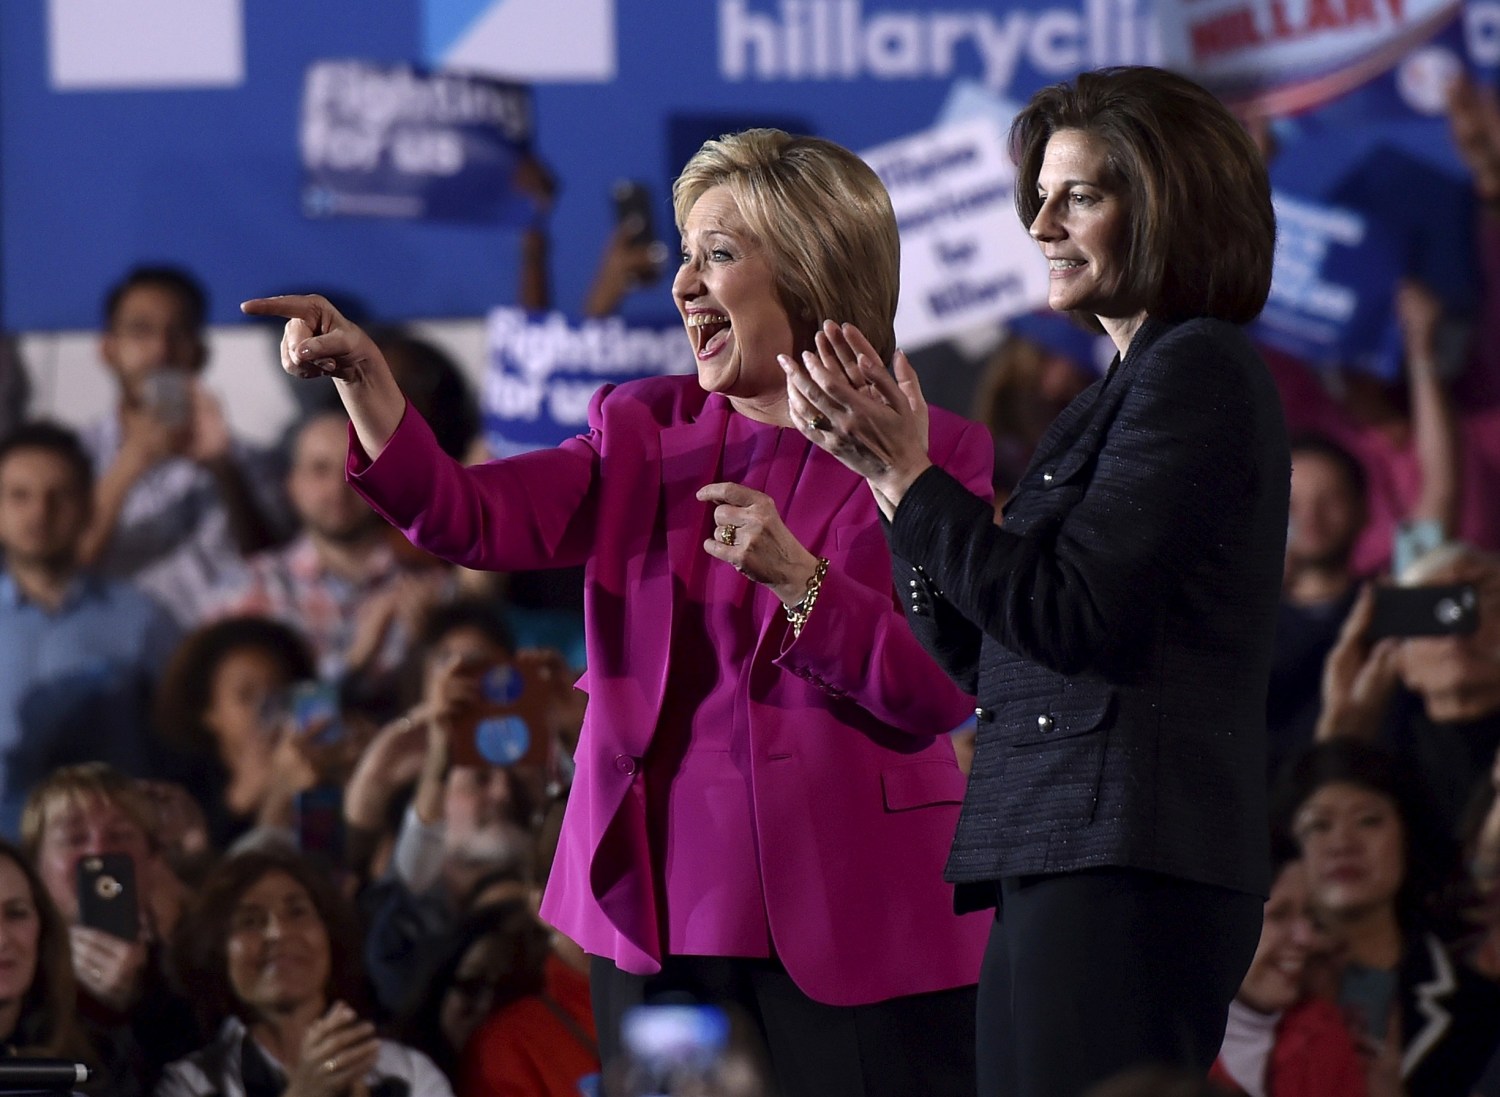 U.S. Democratic presidential candidate Hillary Clinton (L) appears on stage with Nevada Senate candidate Catherine Cortez Masto at a campaign rally at the Laborers International Union hall in Las Vegas, Nevada February 18, 2016. REUTERS/David Becker/File Photo - RTSK54Q